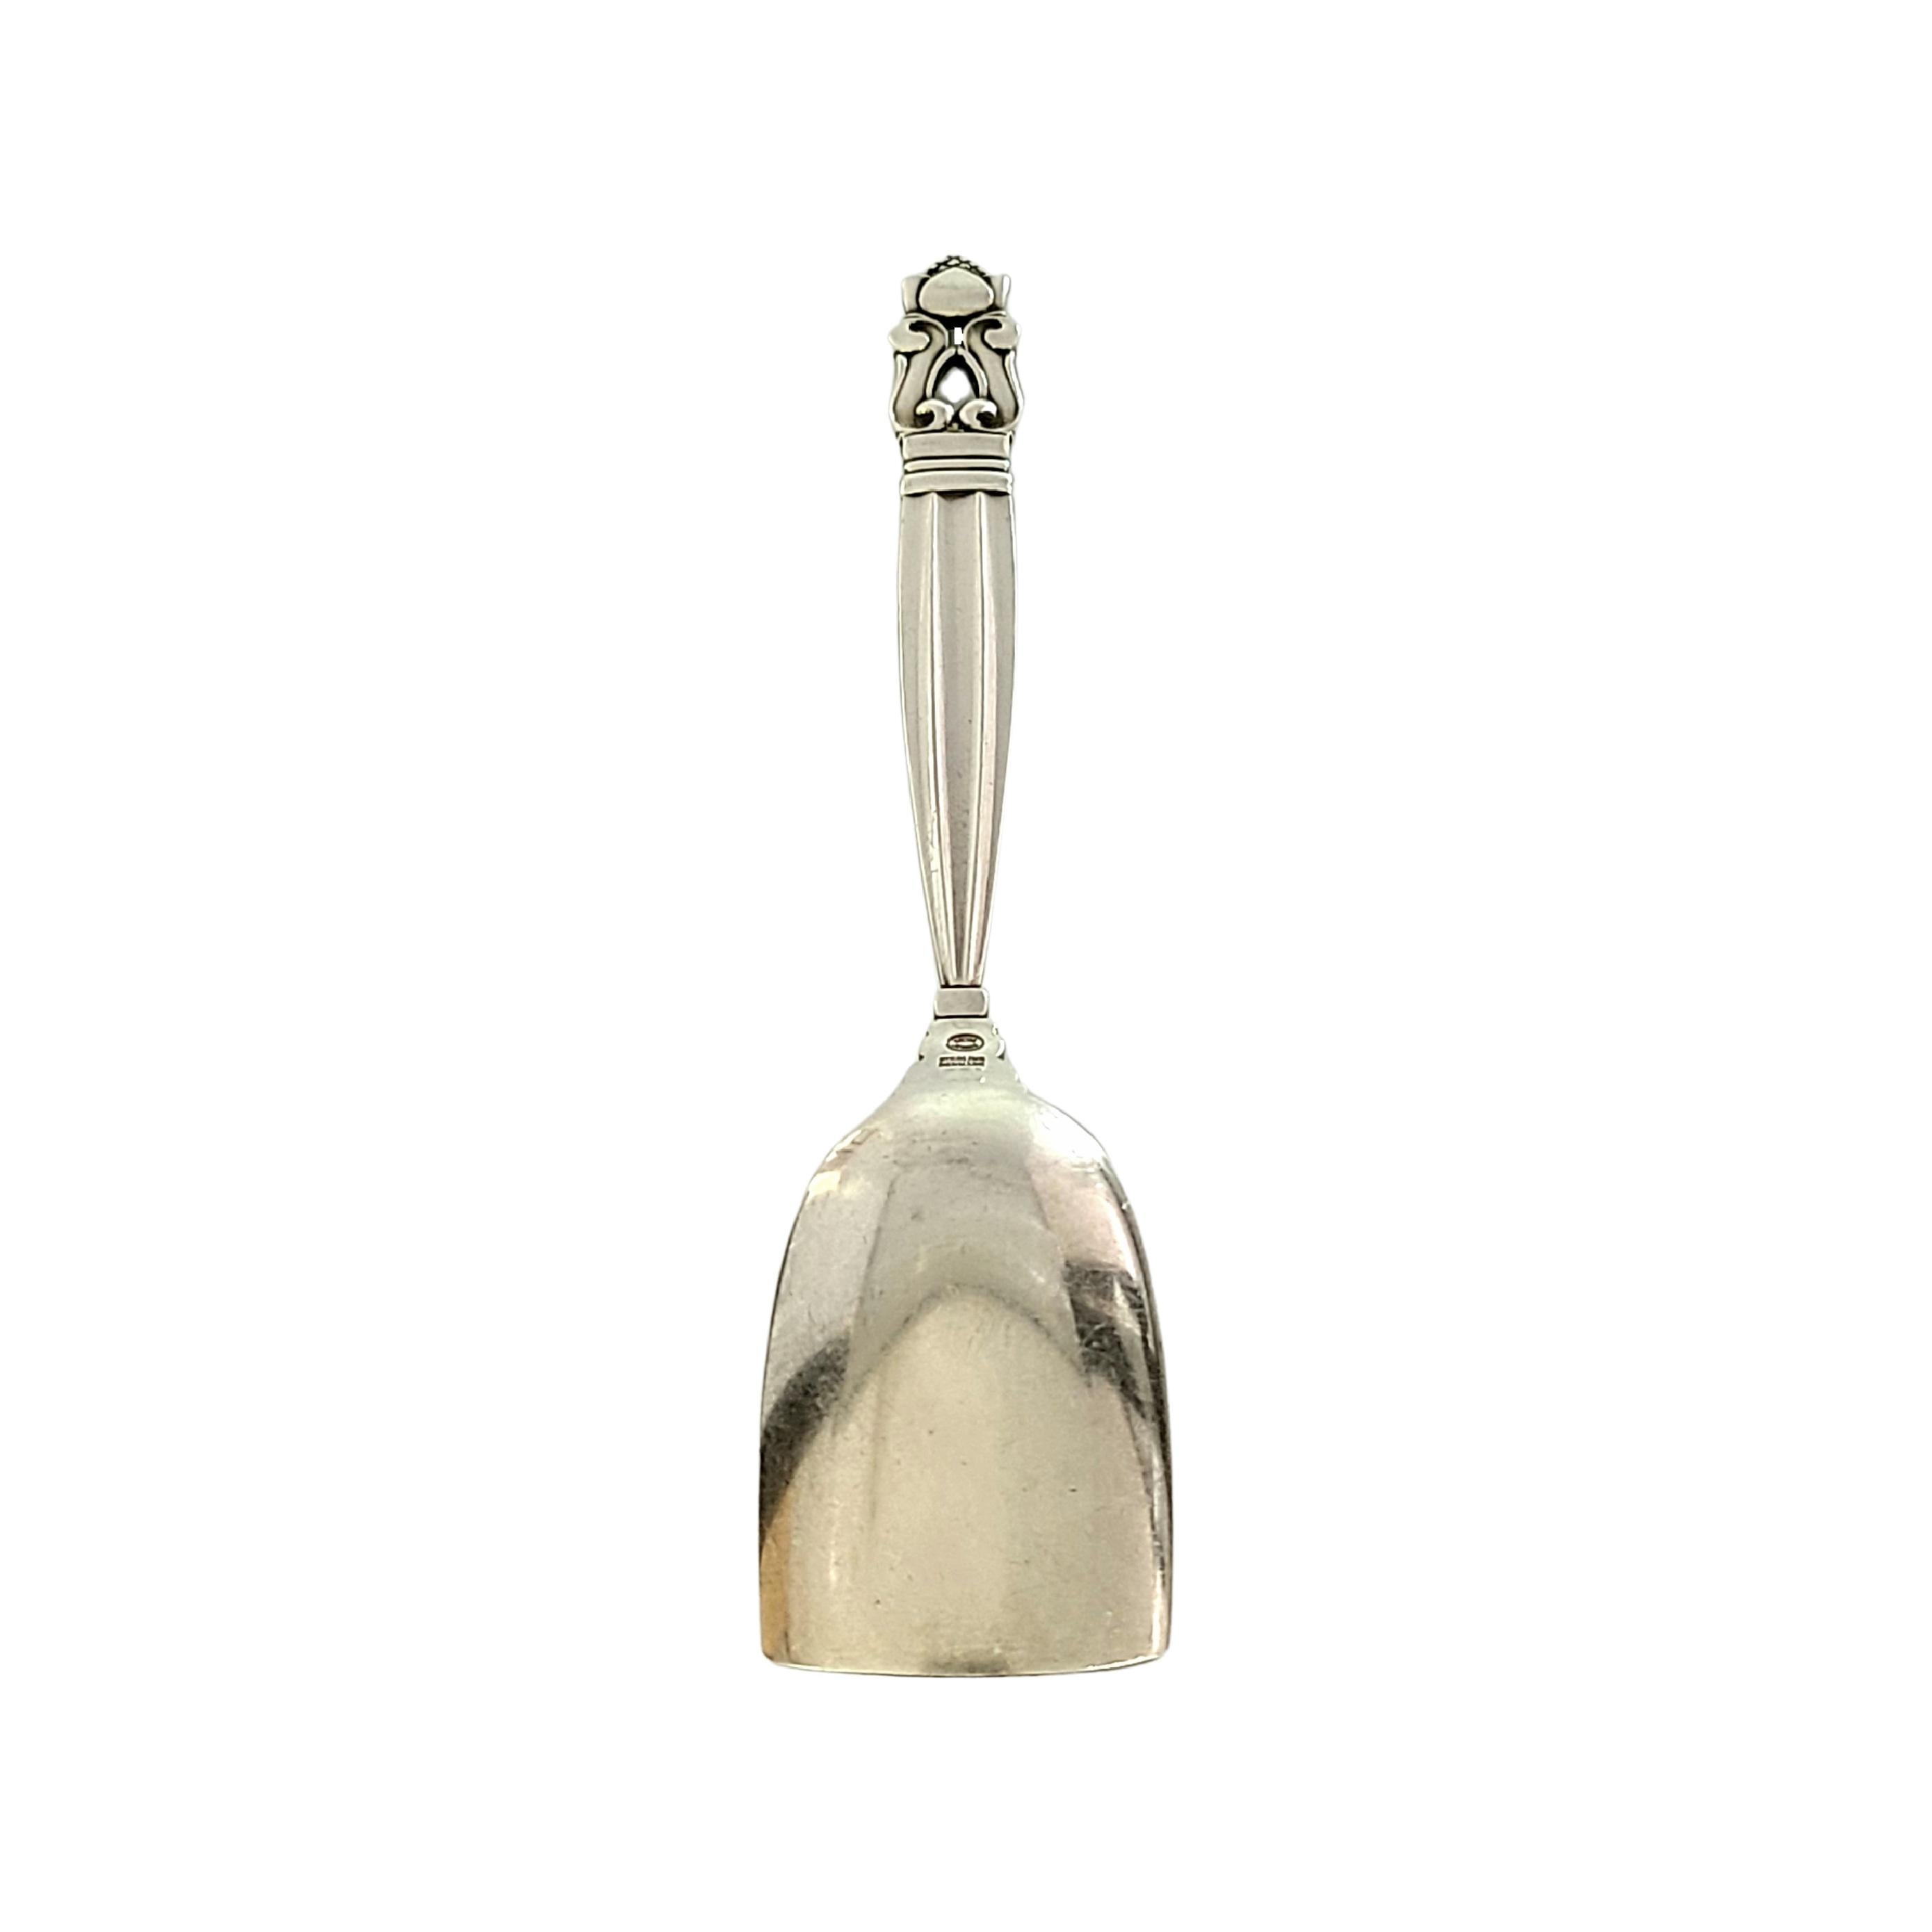 Sterling silver caviar shovel in the Acorn pattern by Georg Jensen

The Acorn pattern was introduced in 1915 as a collaboration between Georg Jensen and designer Johan Ronde. The Acorn pattern, which combines Art Nouveau and Art Deco styles, has